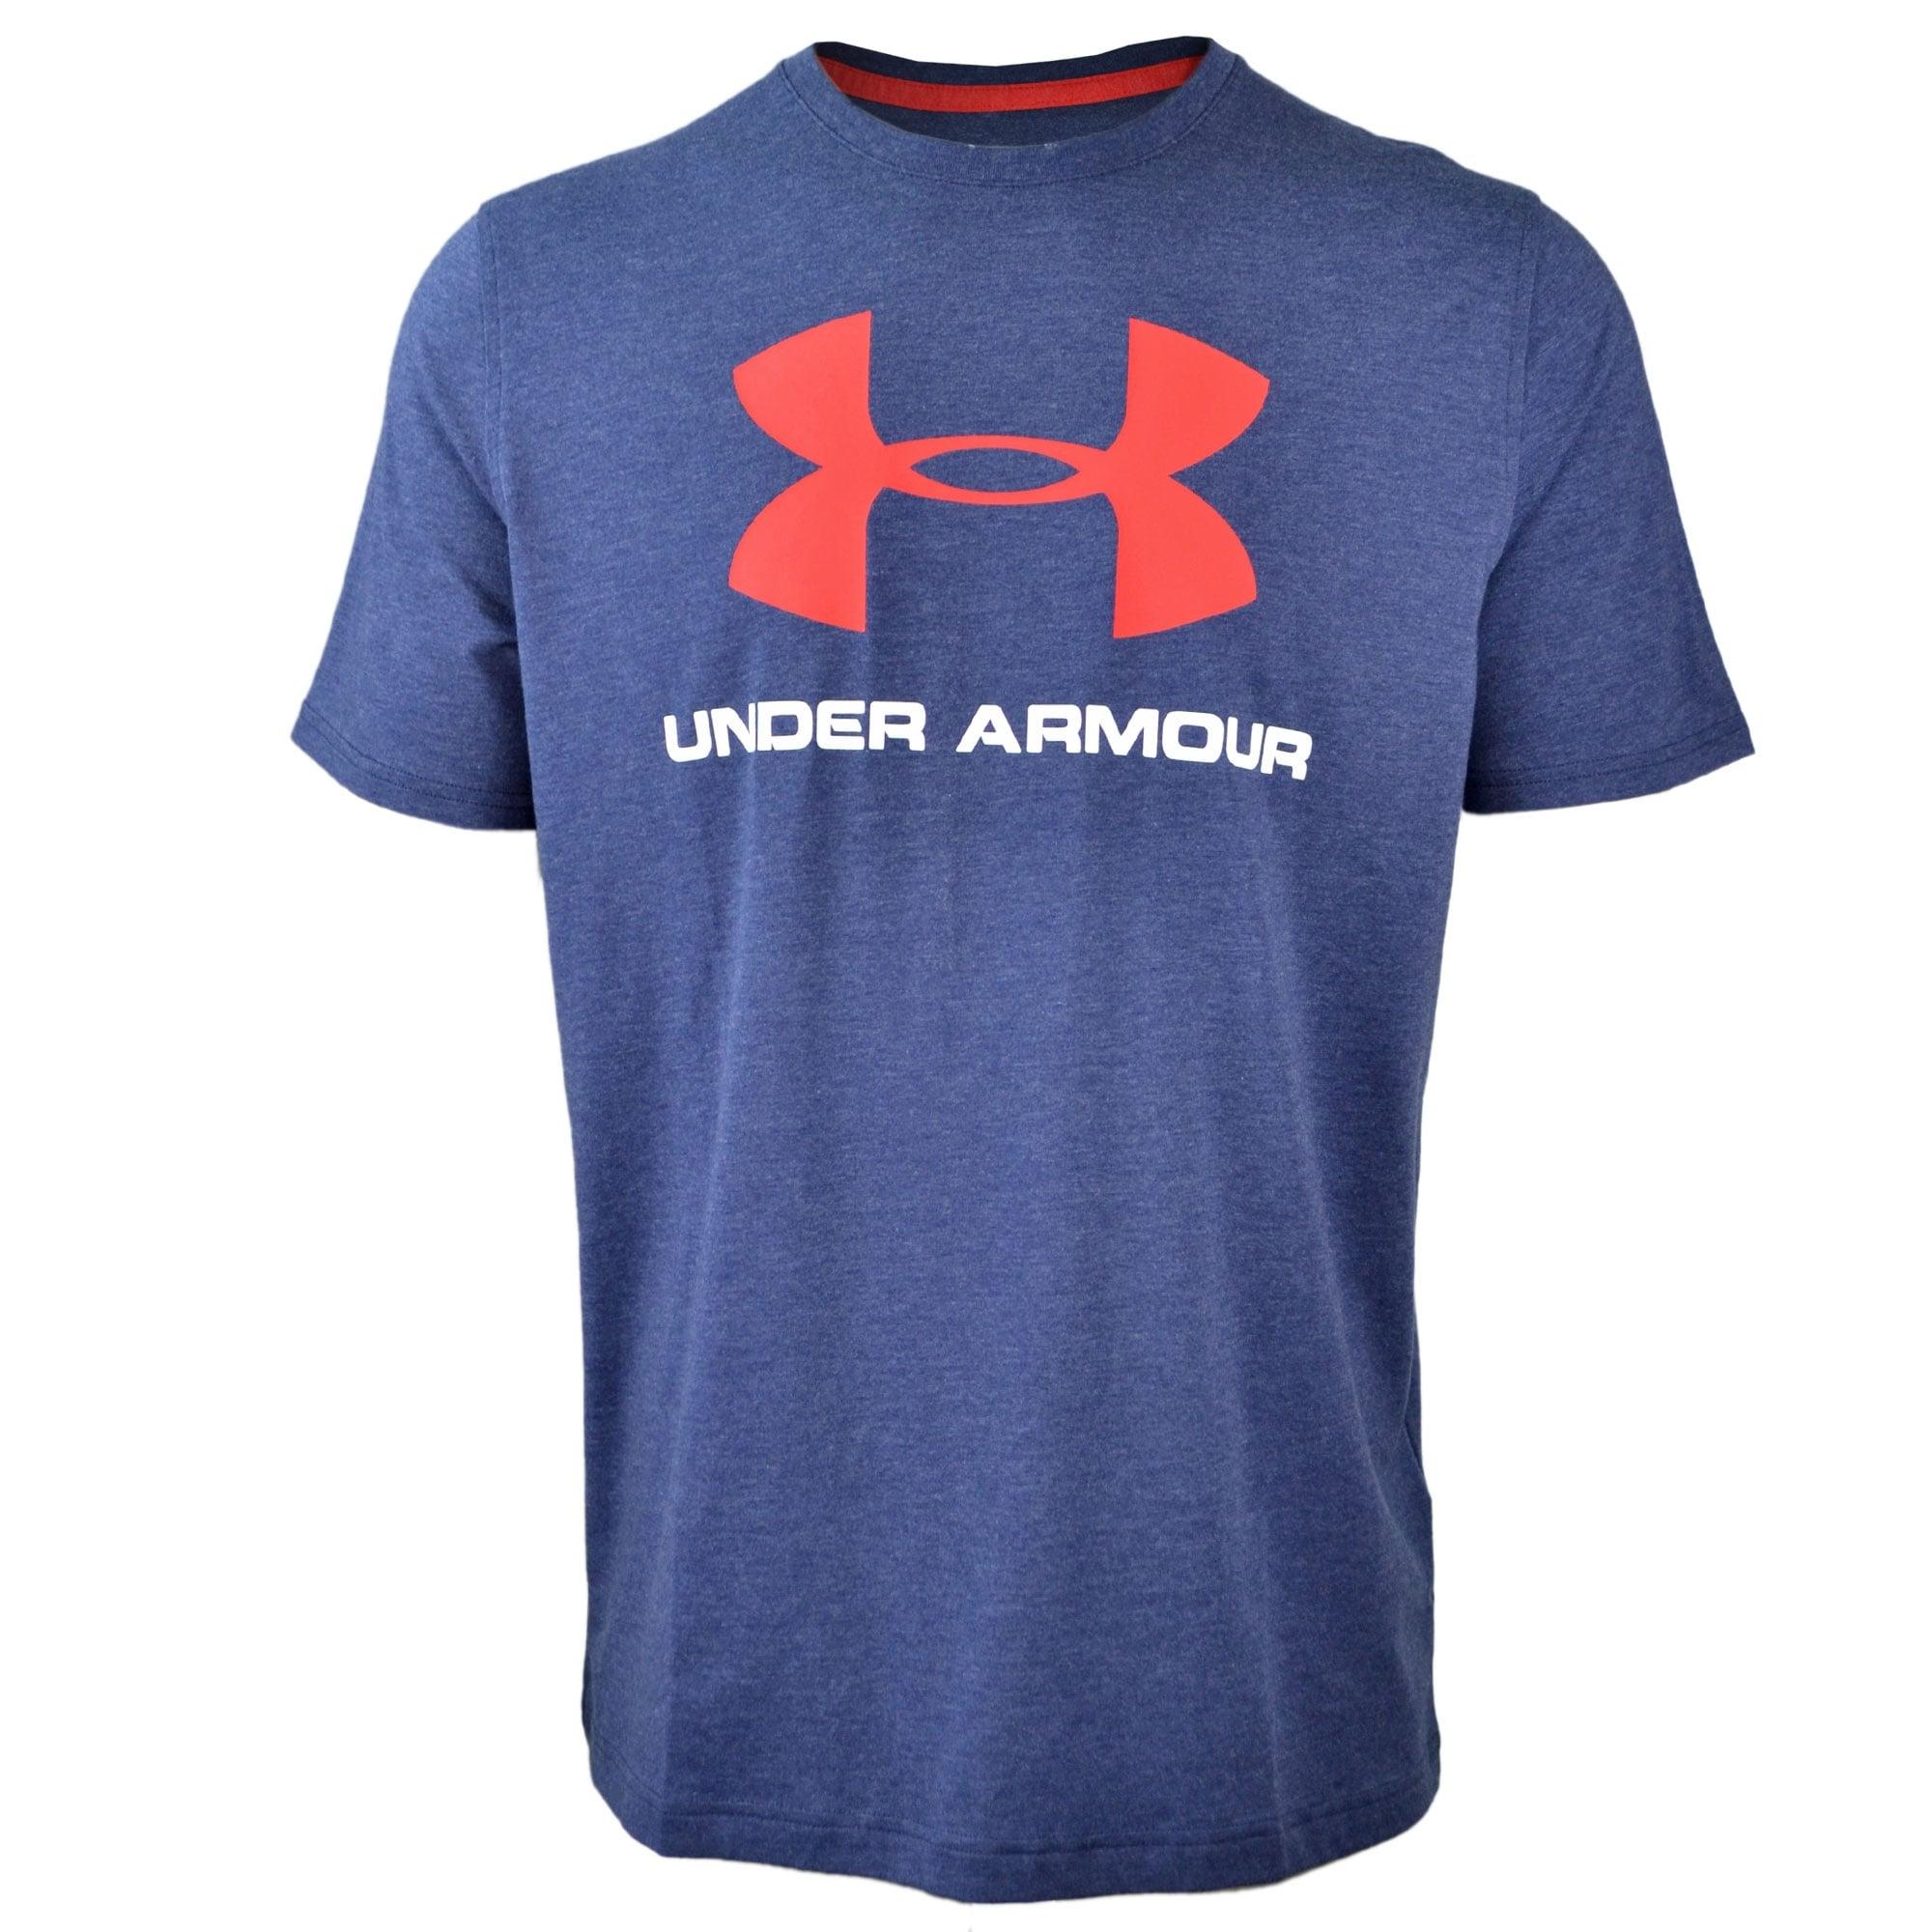 Cool Red and Blue Under Armour Logo - Sportstyle logo t-shirt - Blue